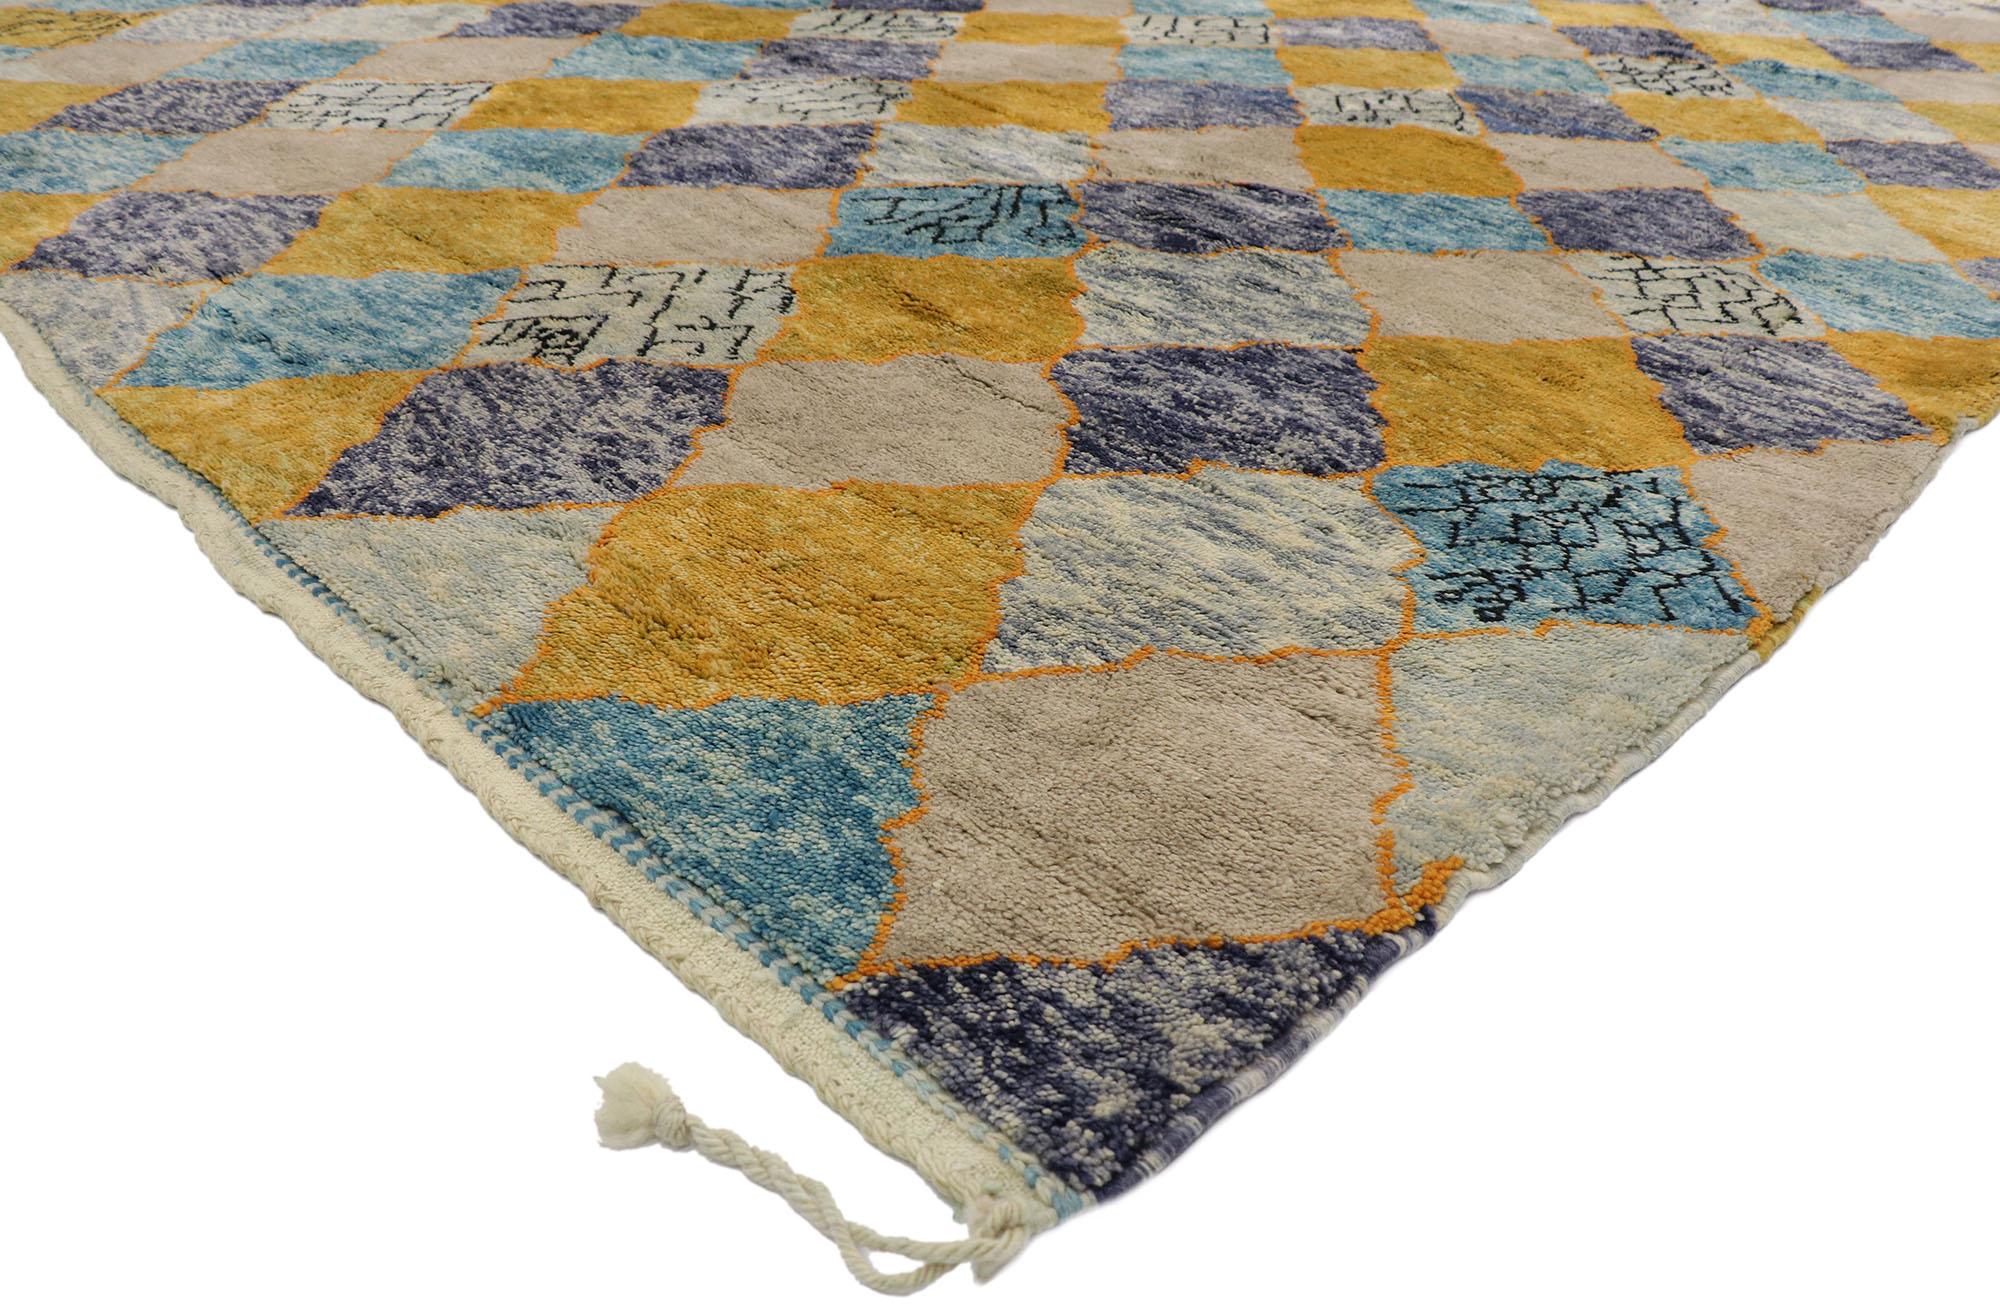 21173 New Contemporary Berber Moroccan rug with Preppy Boho Style 10'03 x 13'03. Preppy argyle meets boho chic with a twist. Showcasing a bold expressive design, incredible detail and texture, this hand knotted wool contemporary Berber Moroccan rug